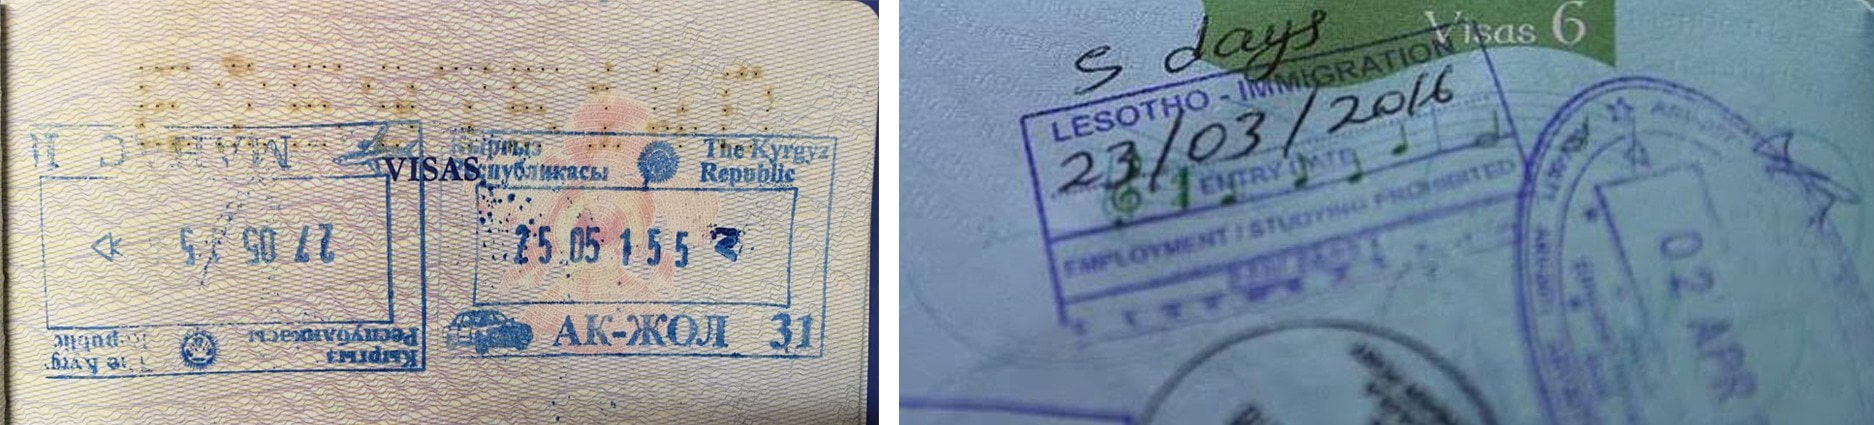 Passport stamp for Kyrgyzstan and Lesotho